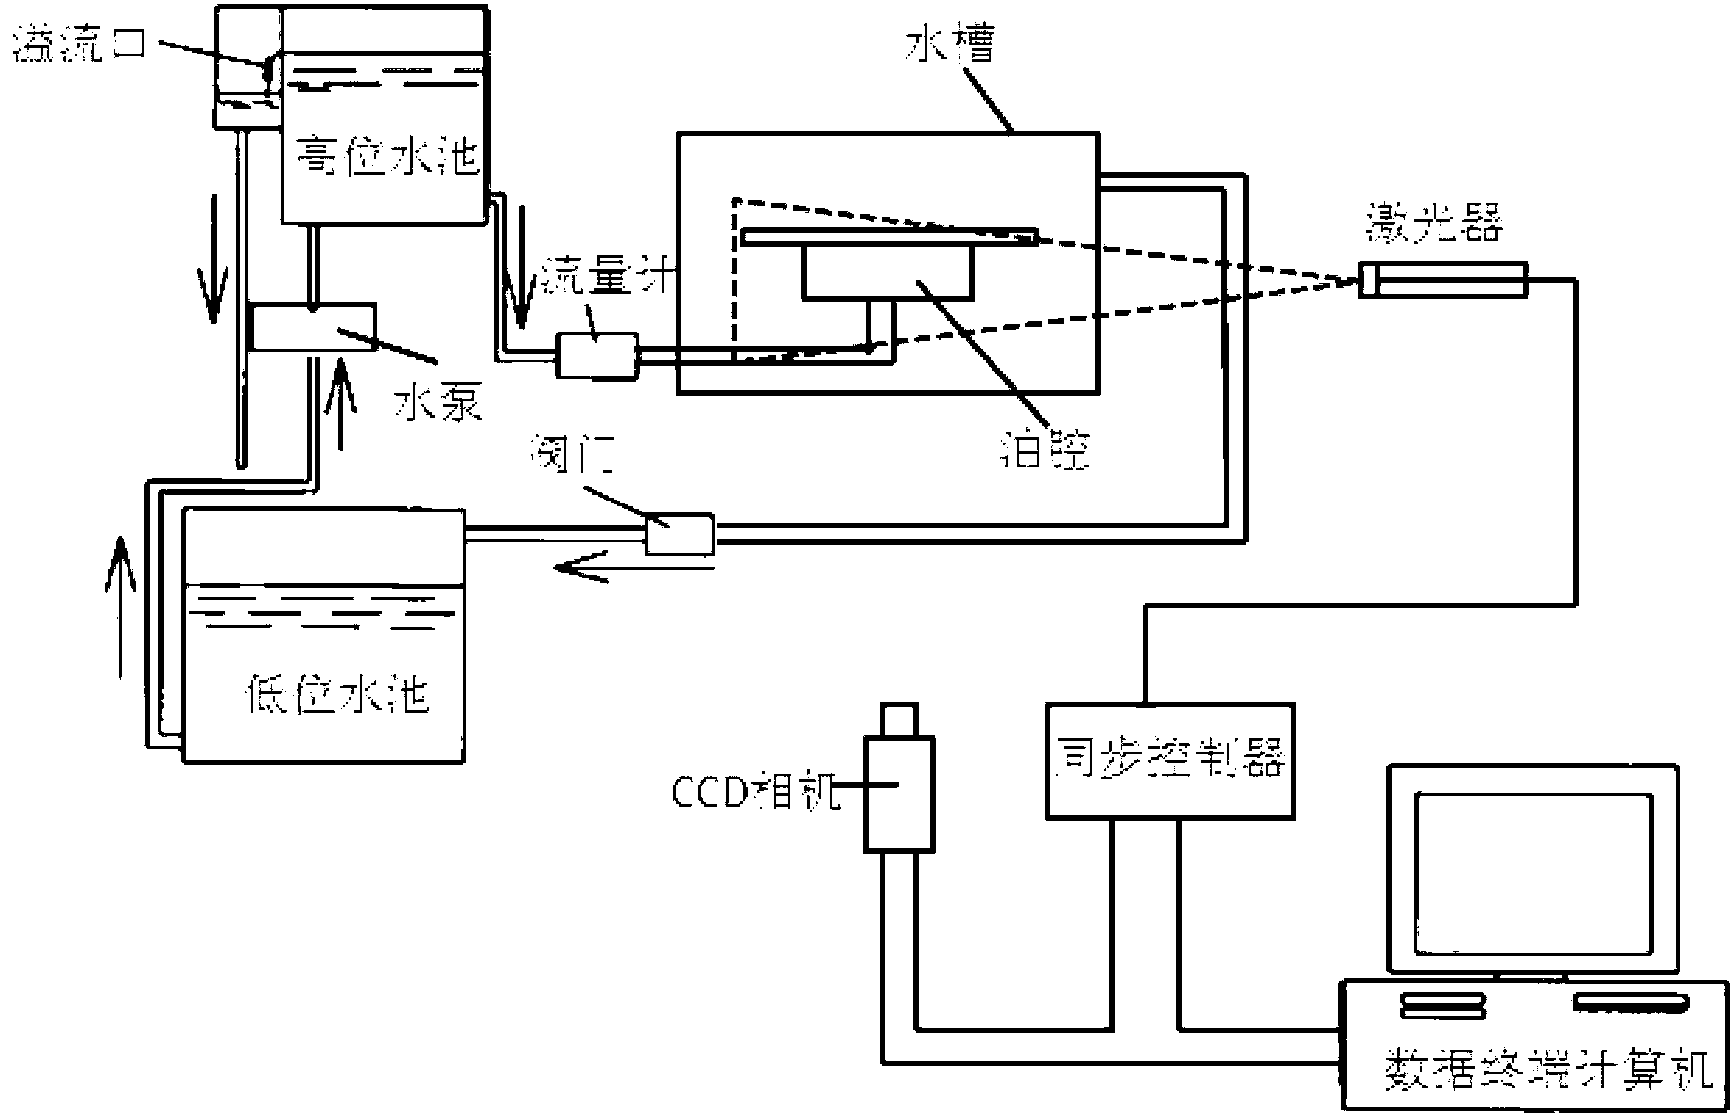 Flow field observing device for oil cavity